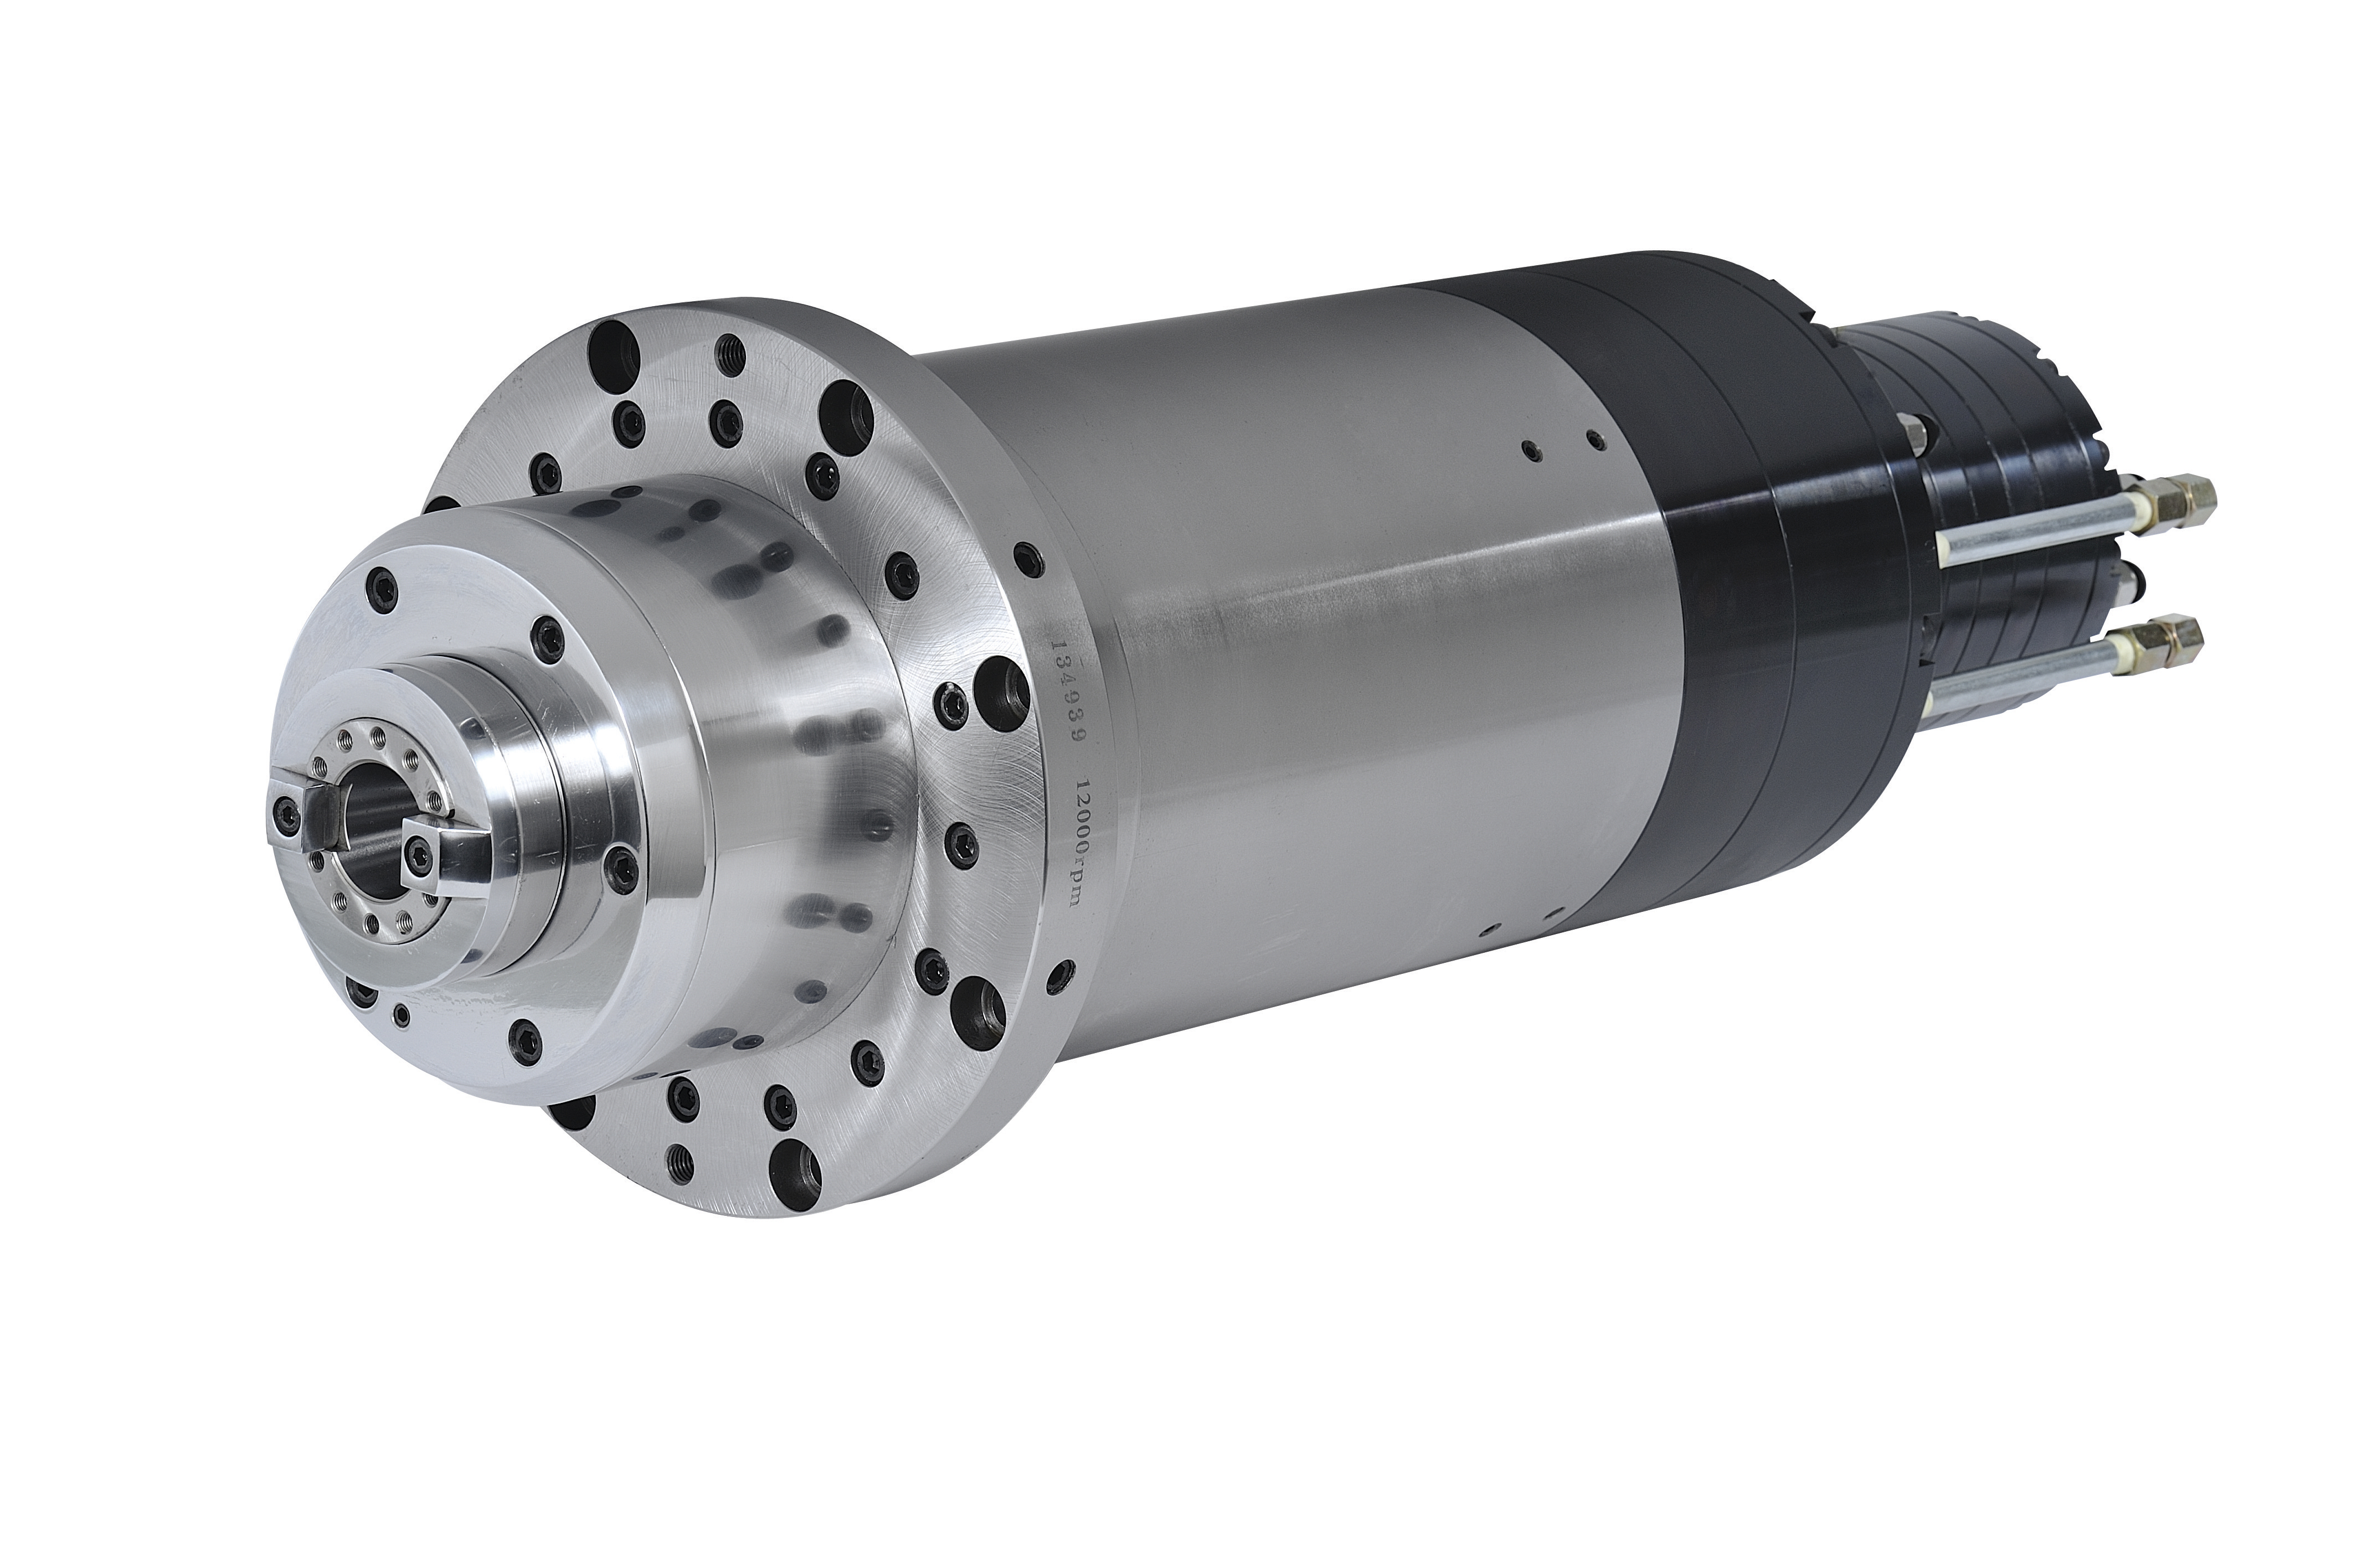 
                                Motorized Spindle for Milling/Grinding/Mill-turn/Multi-spindle
                            